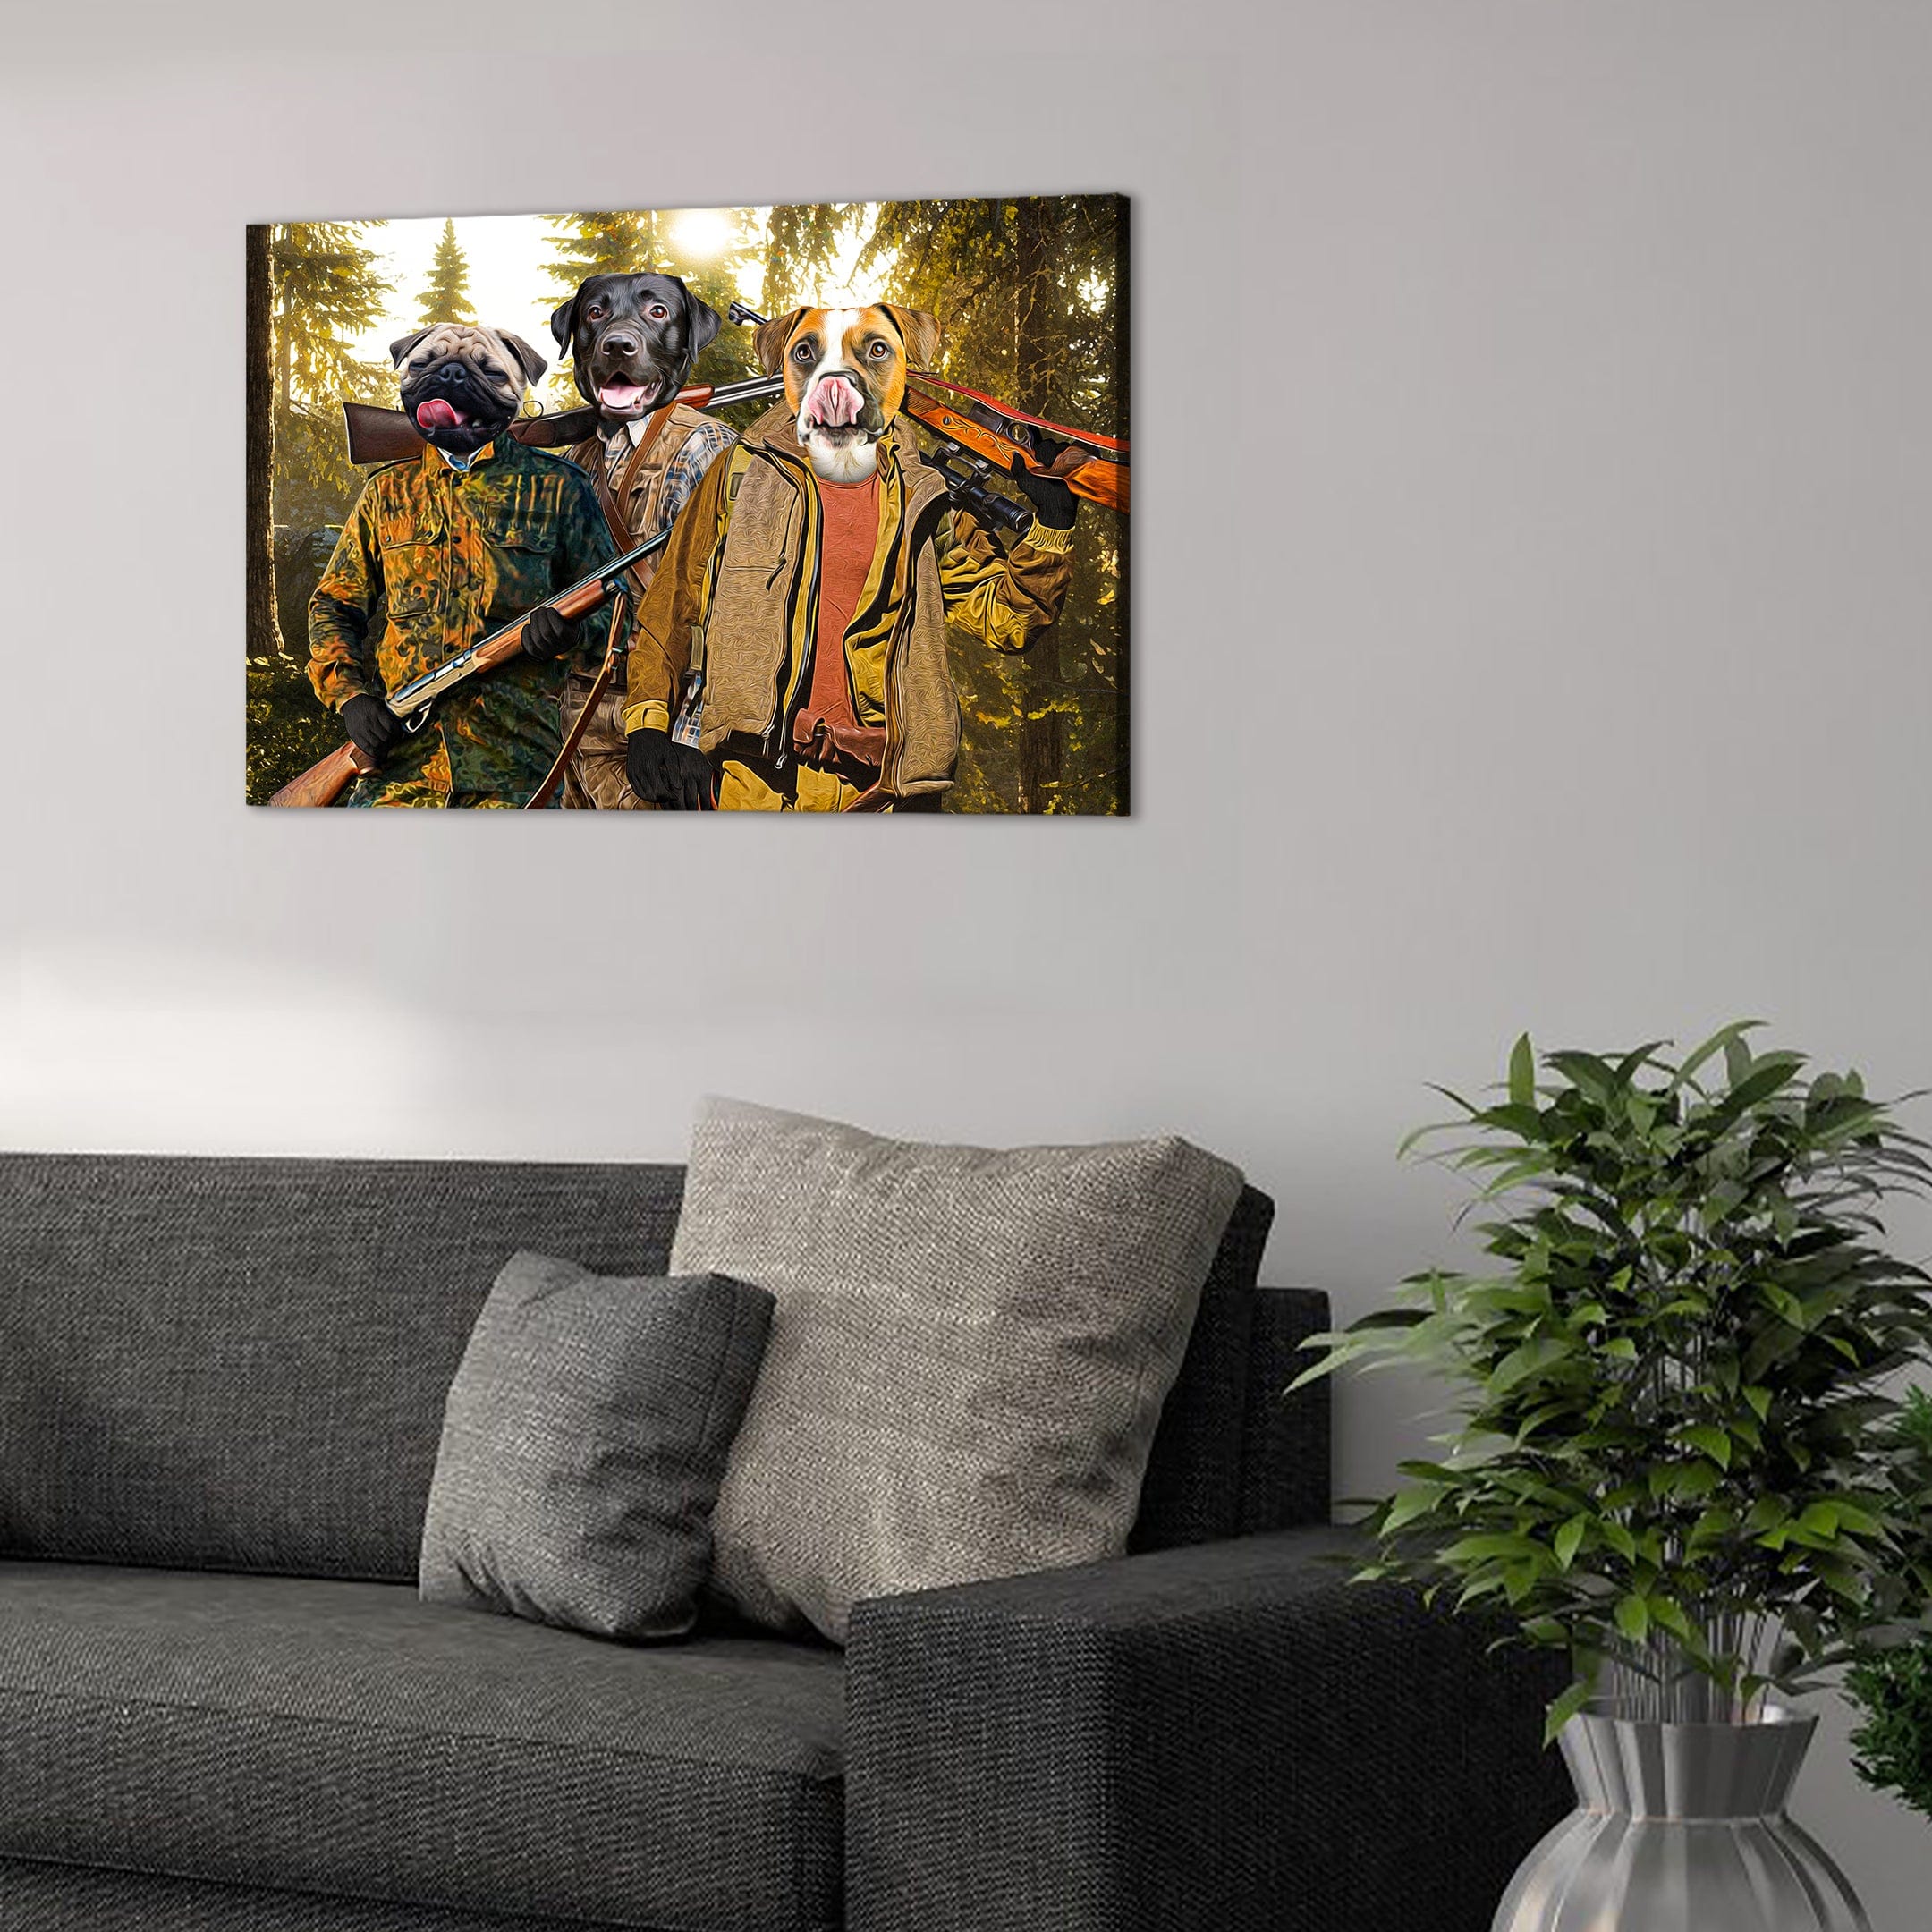 &#39;The Hunters&#39; Personalized 3 Pet Canvas